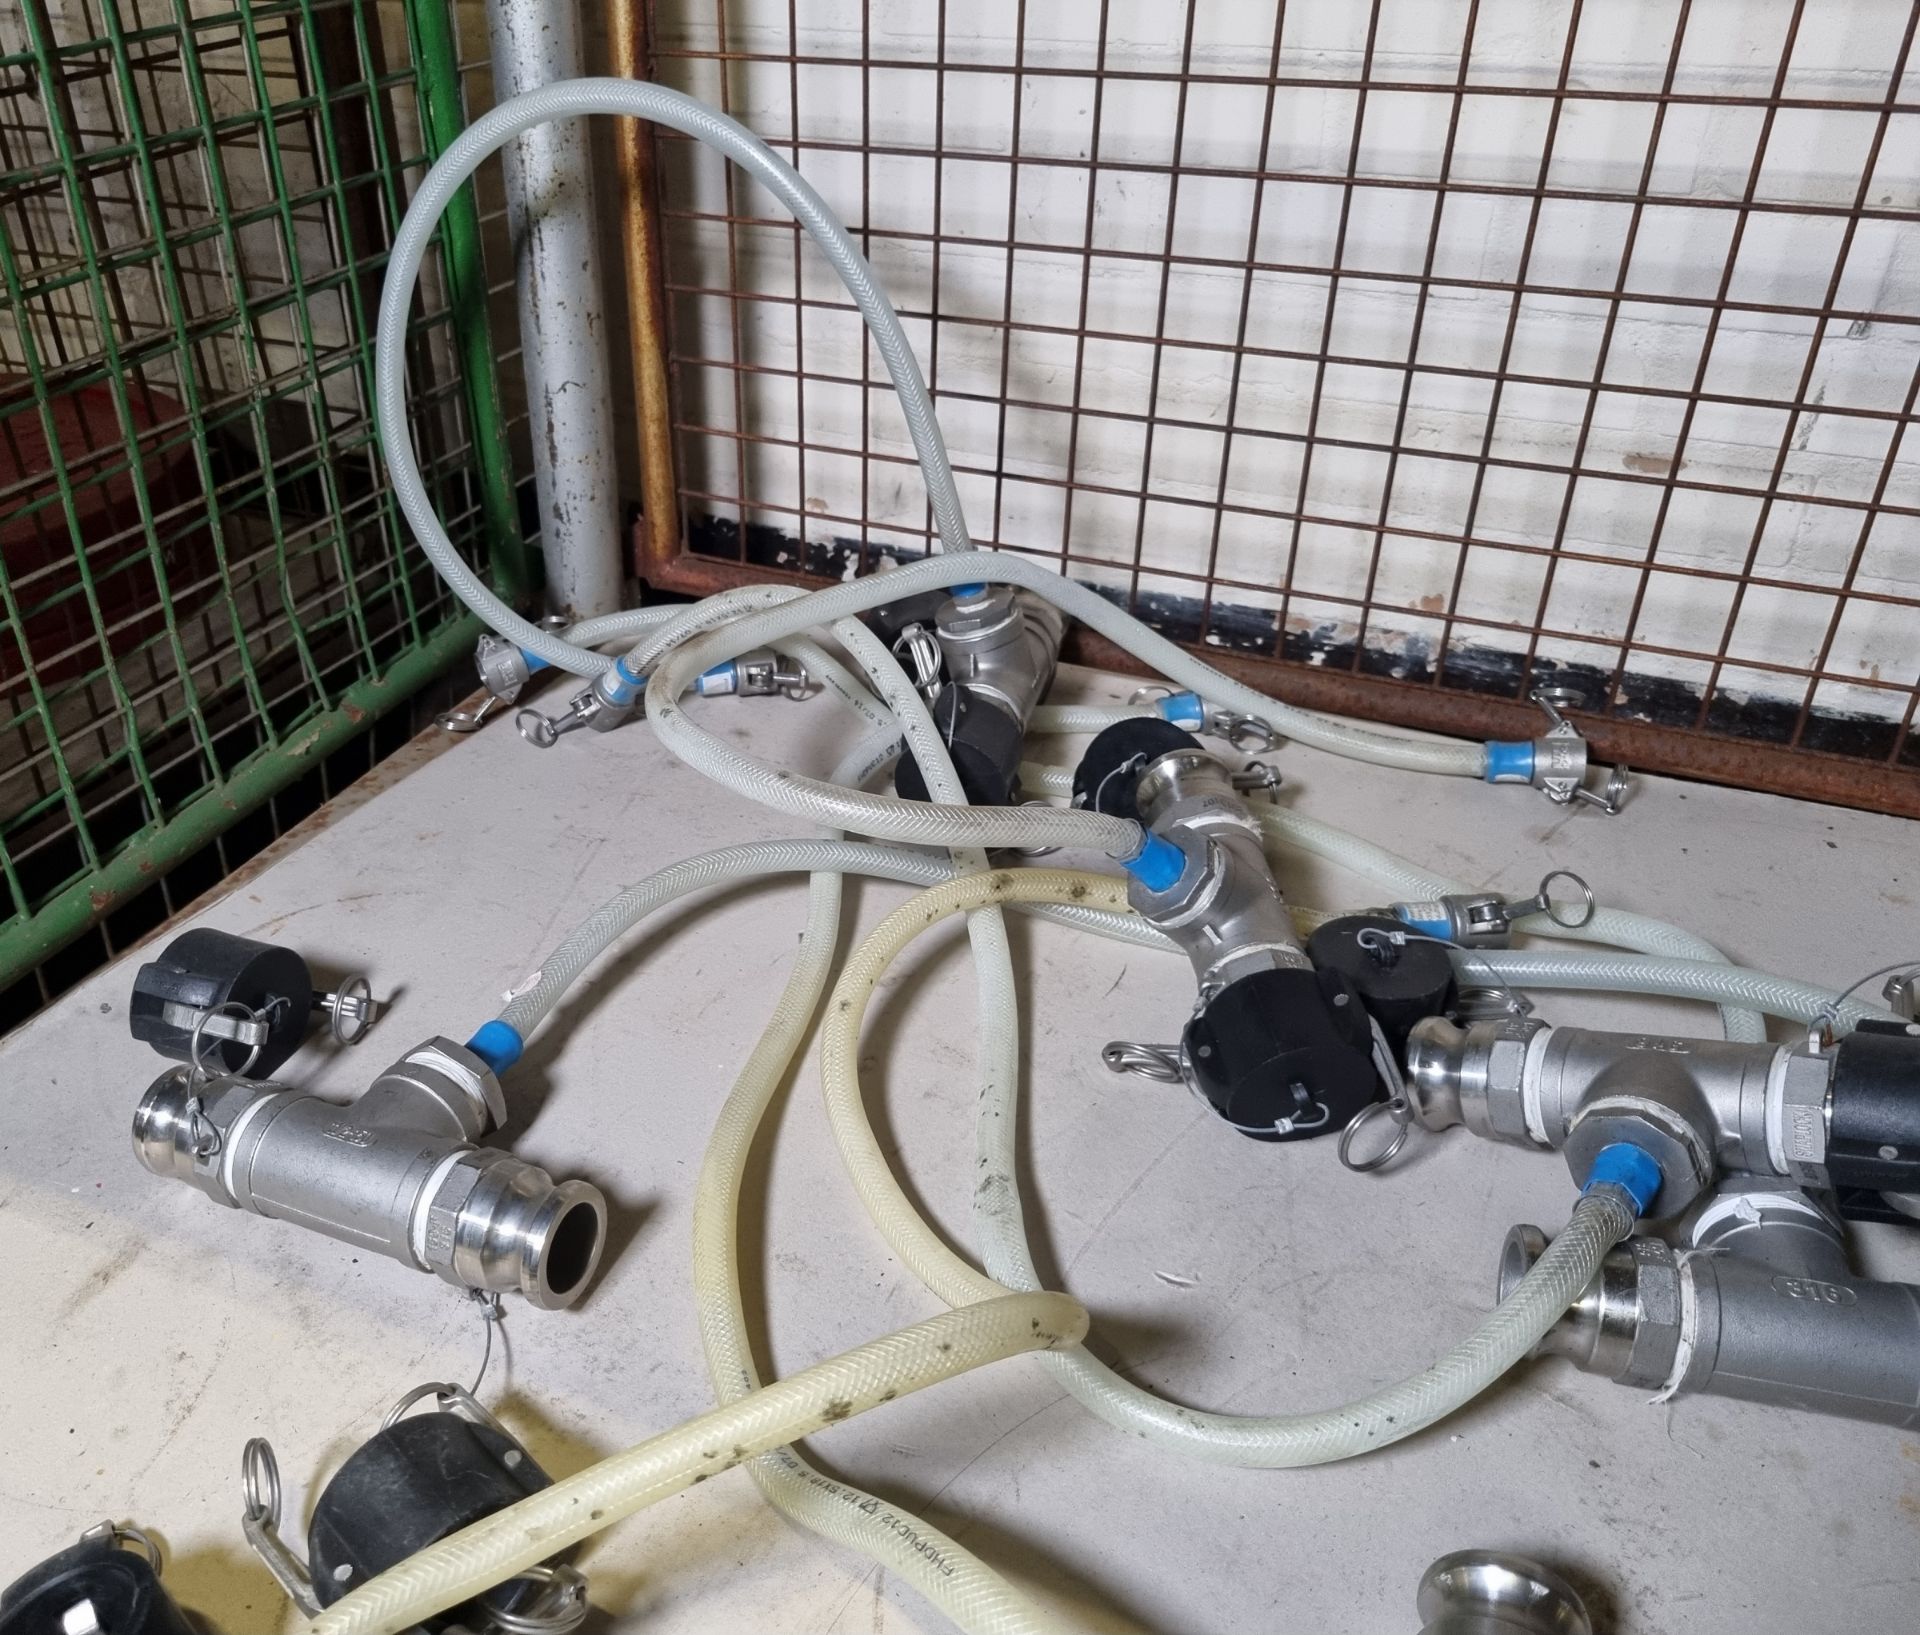 8x Stainless steel piping 11/2-150 with Snaplock connectors 150-F 316 with 1M flexible hose - Image 4 of 5